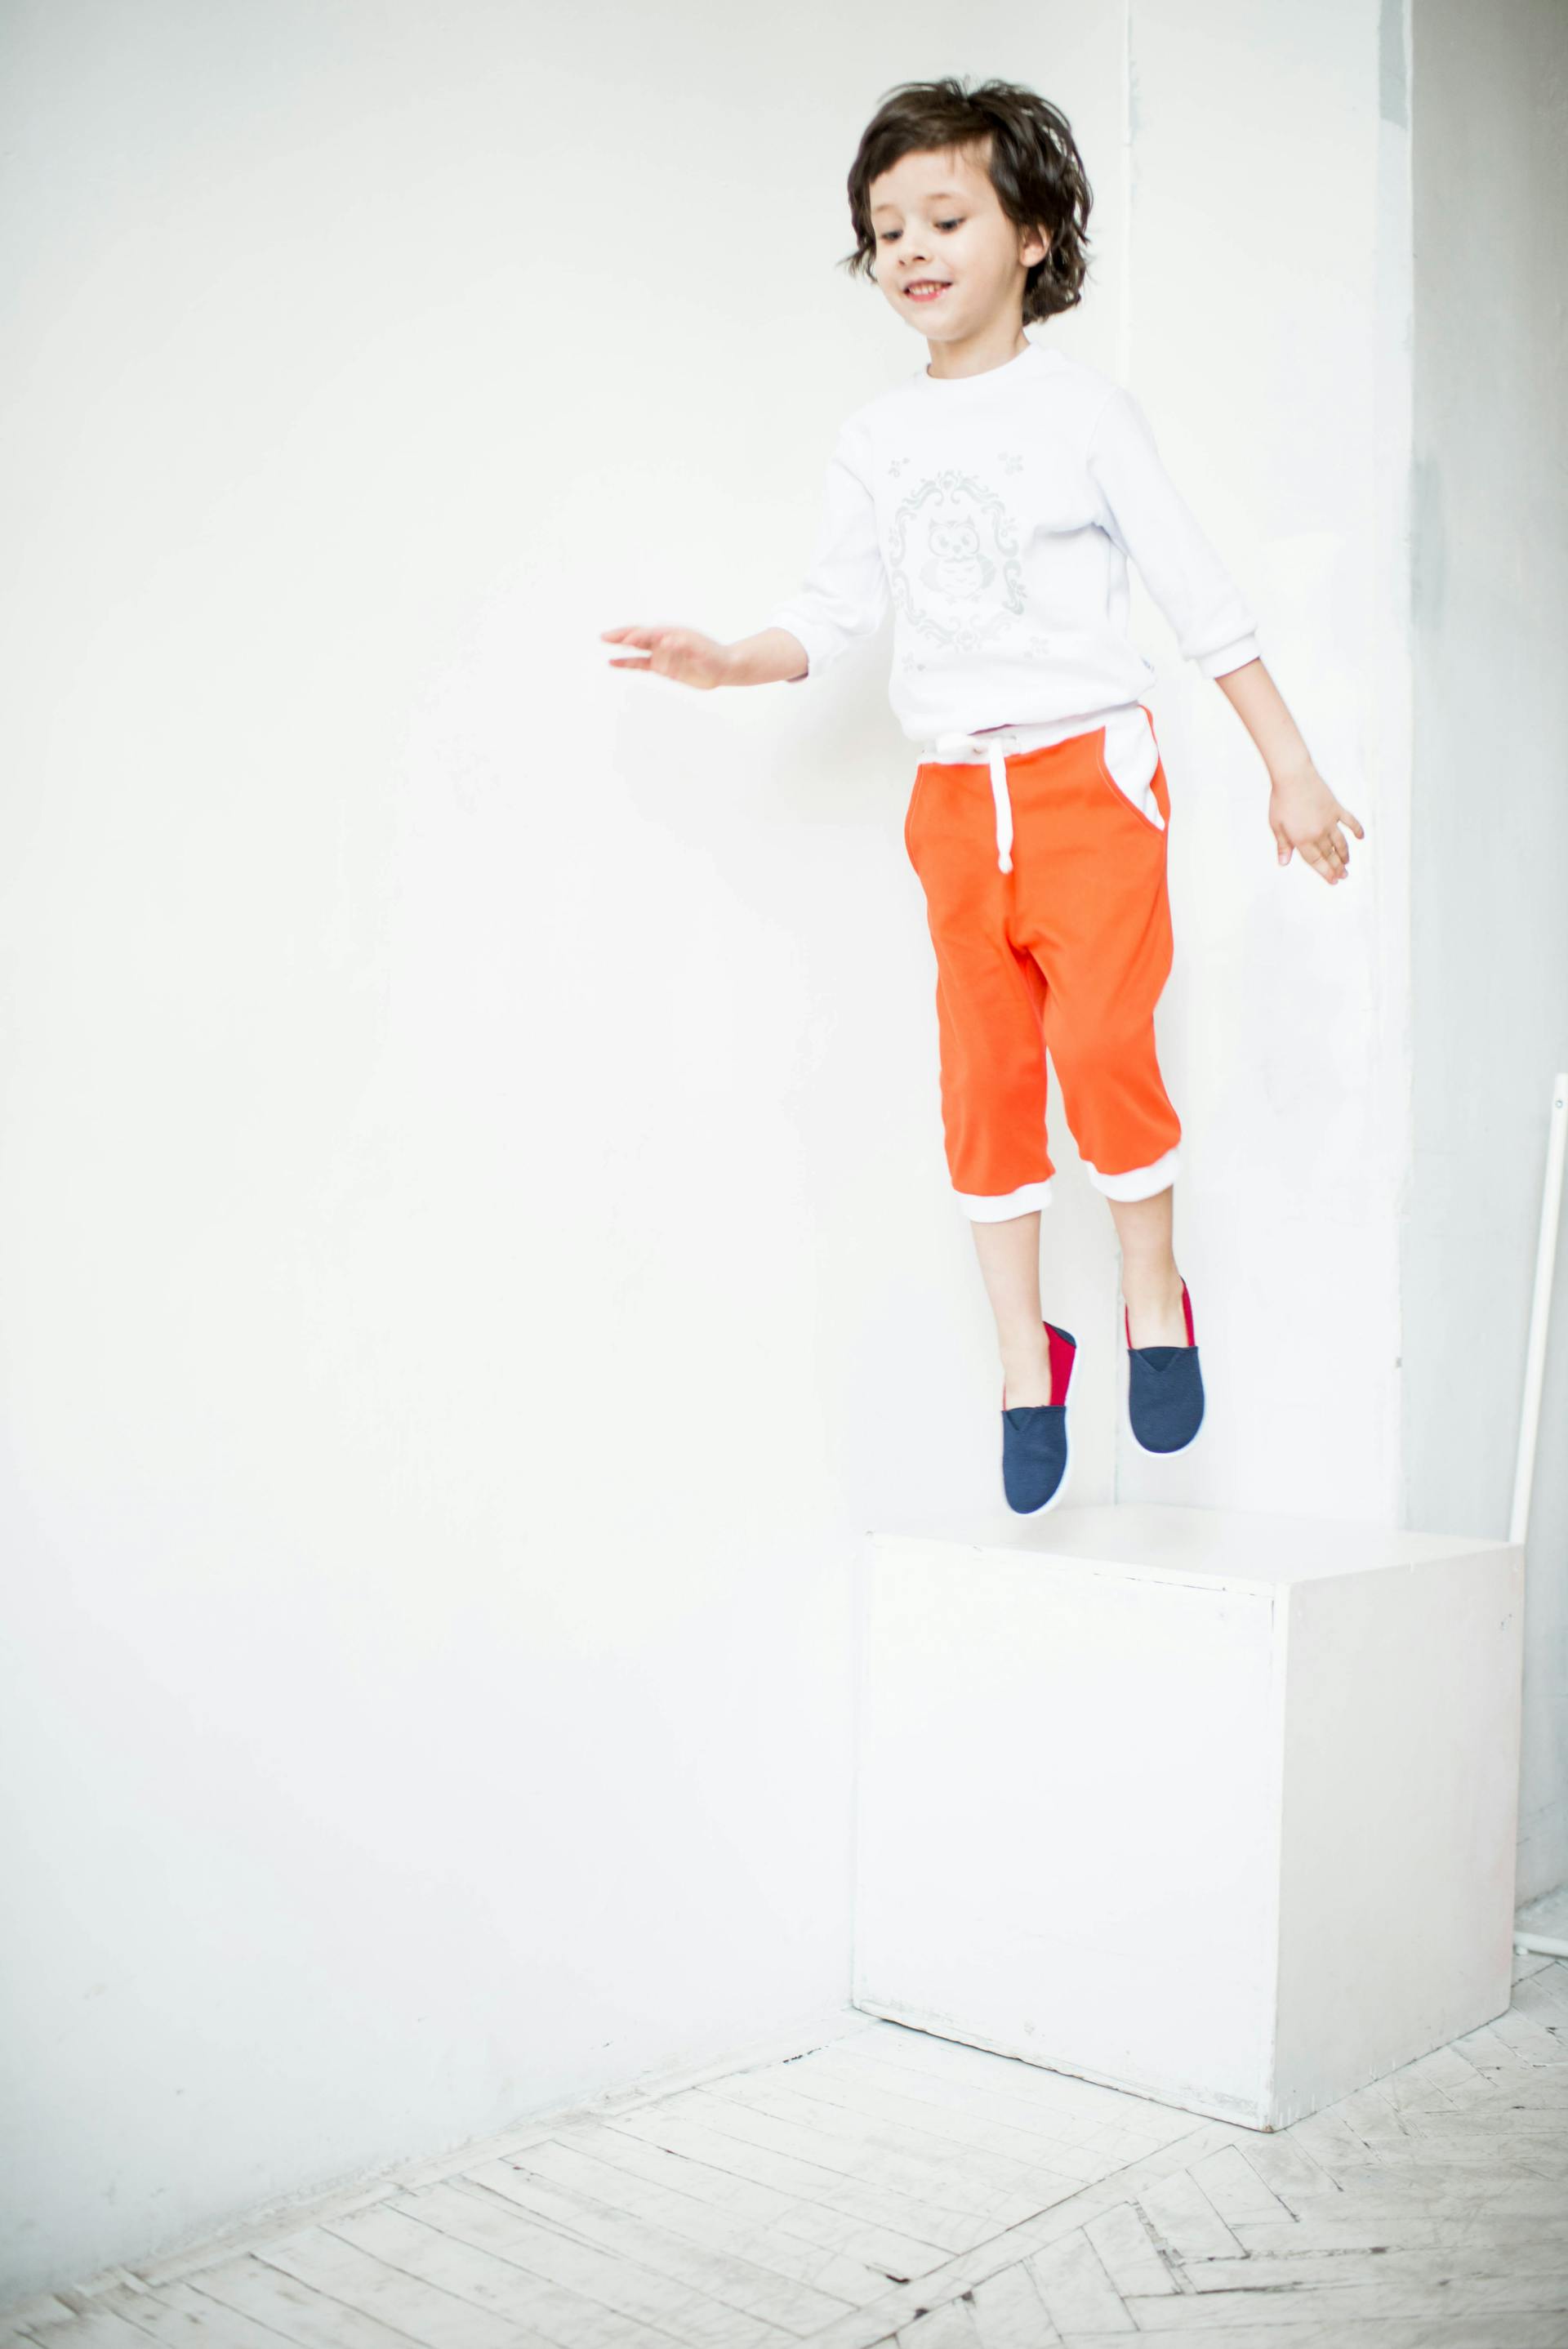 A boy jumping in a room | Source: Pexels